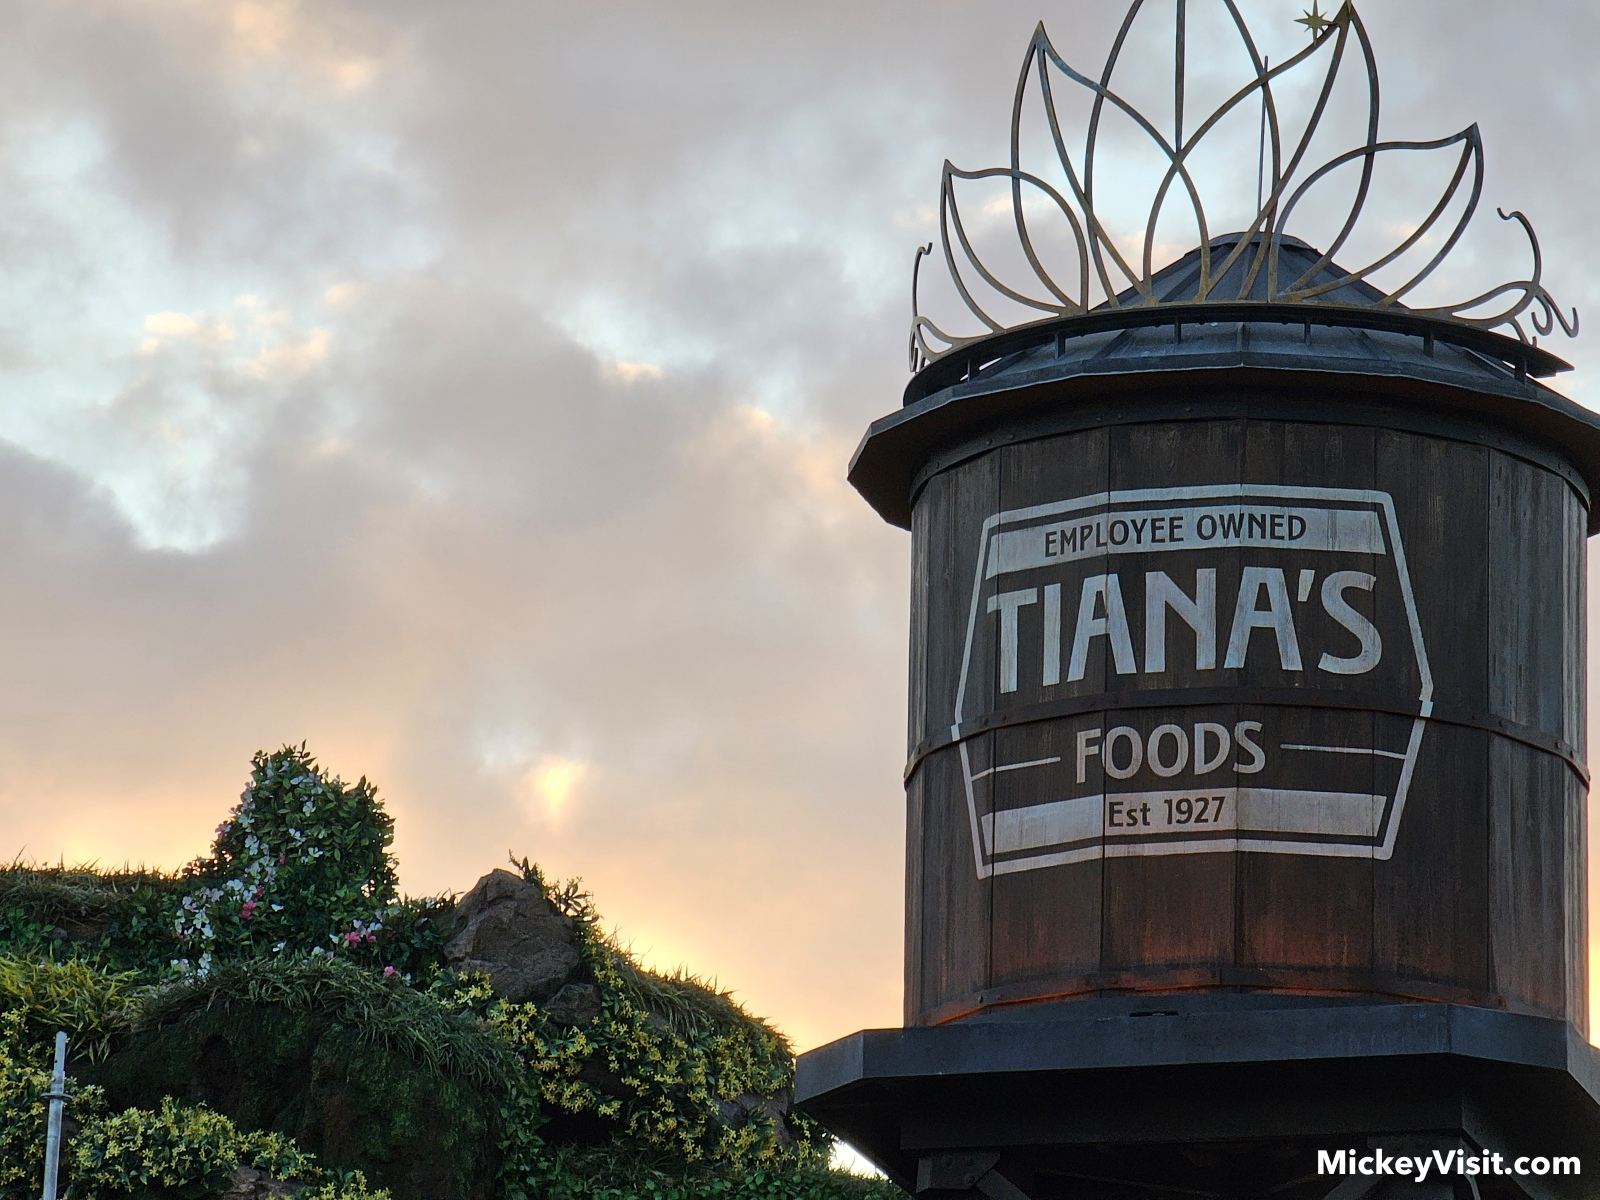 A look at the tiara-topped Tiana's Foods water tower at Tiana's Bayou Adventure as the sun goes down in the background.